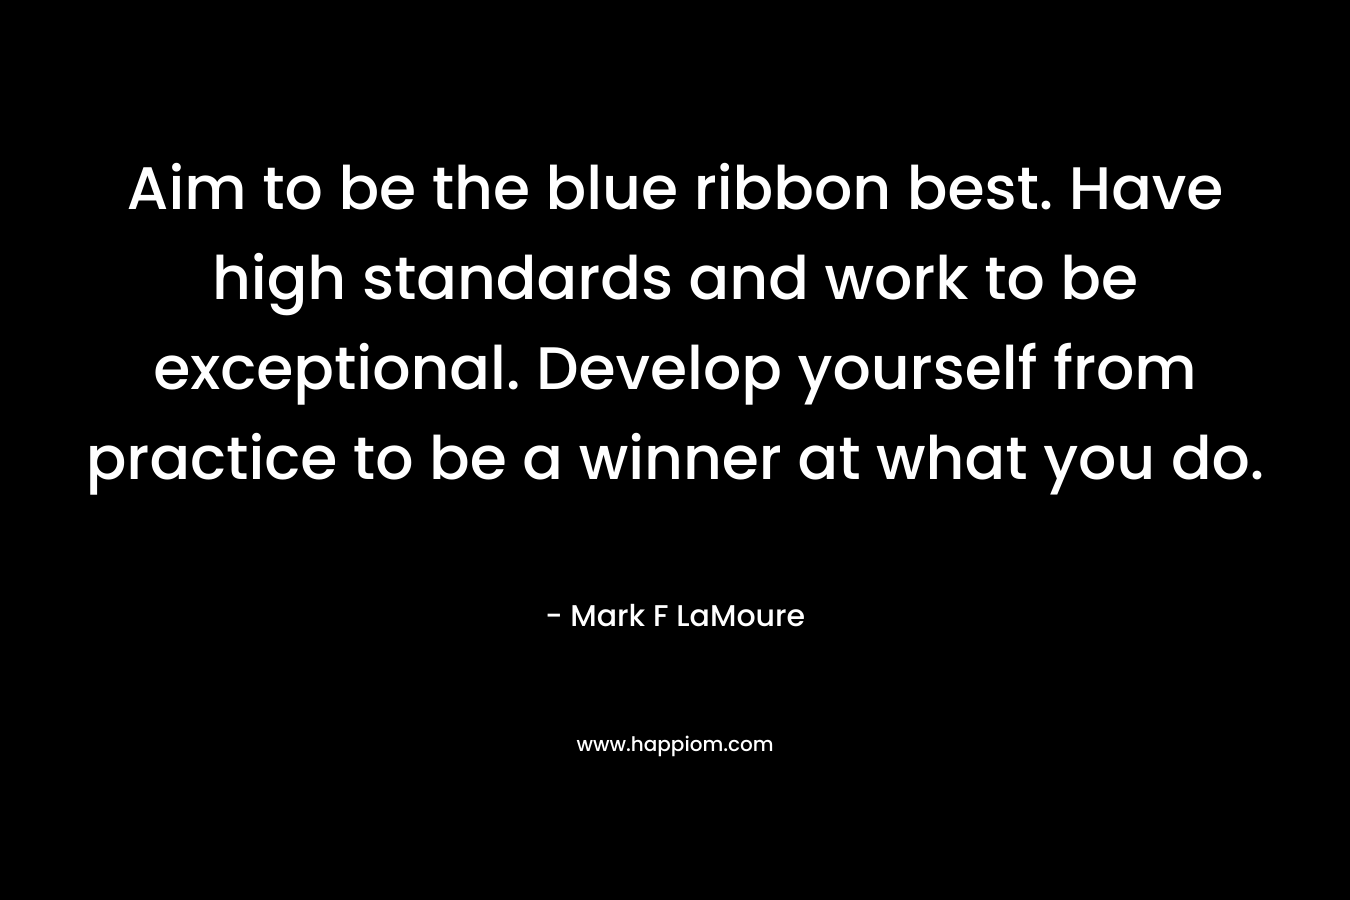 Aim to be the blue ribbon best. Have high standards and work to be exceptional. Develop yourself from practice to be a winner at what you do.